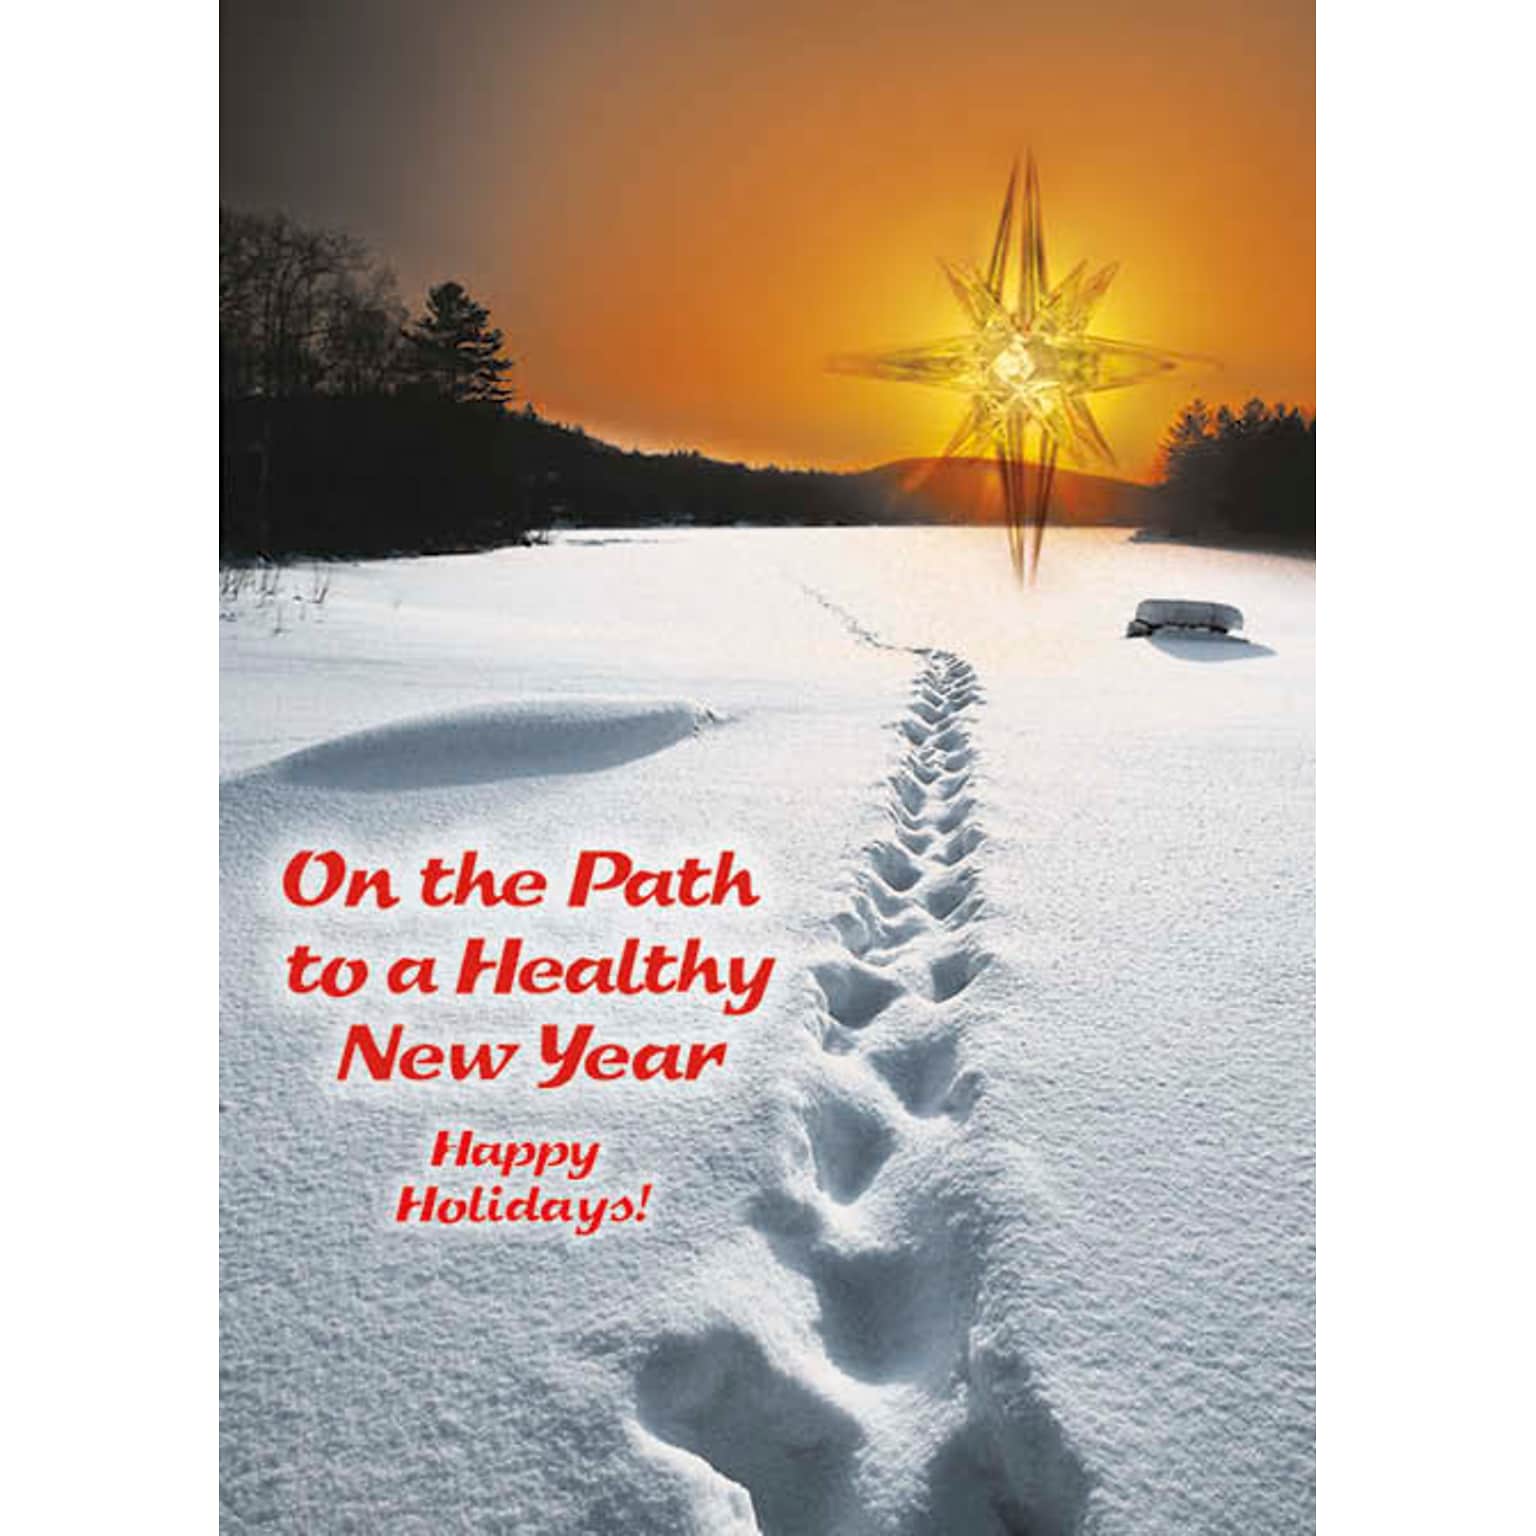 On The Path To A Healthy New Year Holiday Greeting Cards, With A7 Envelopes, 7 x 5, 25 Cards per Set